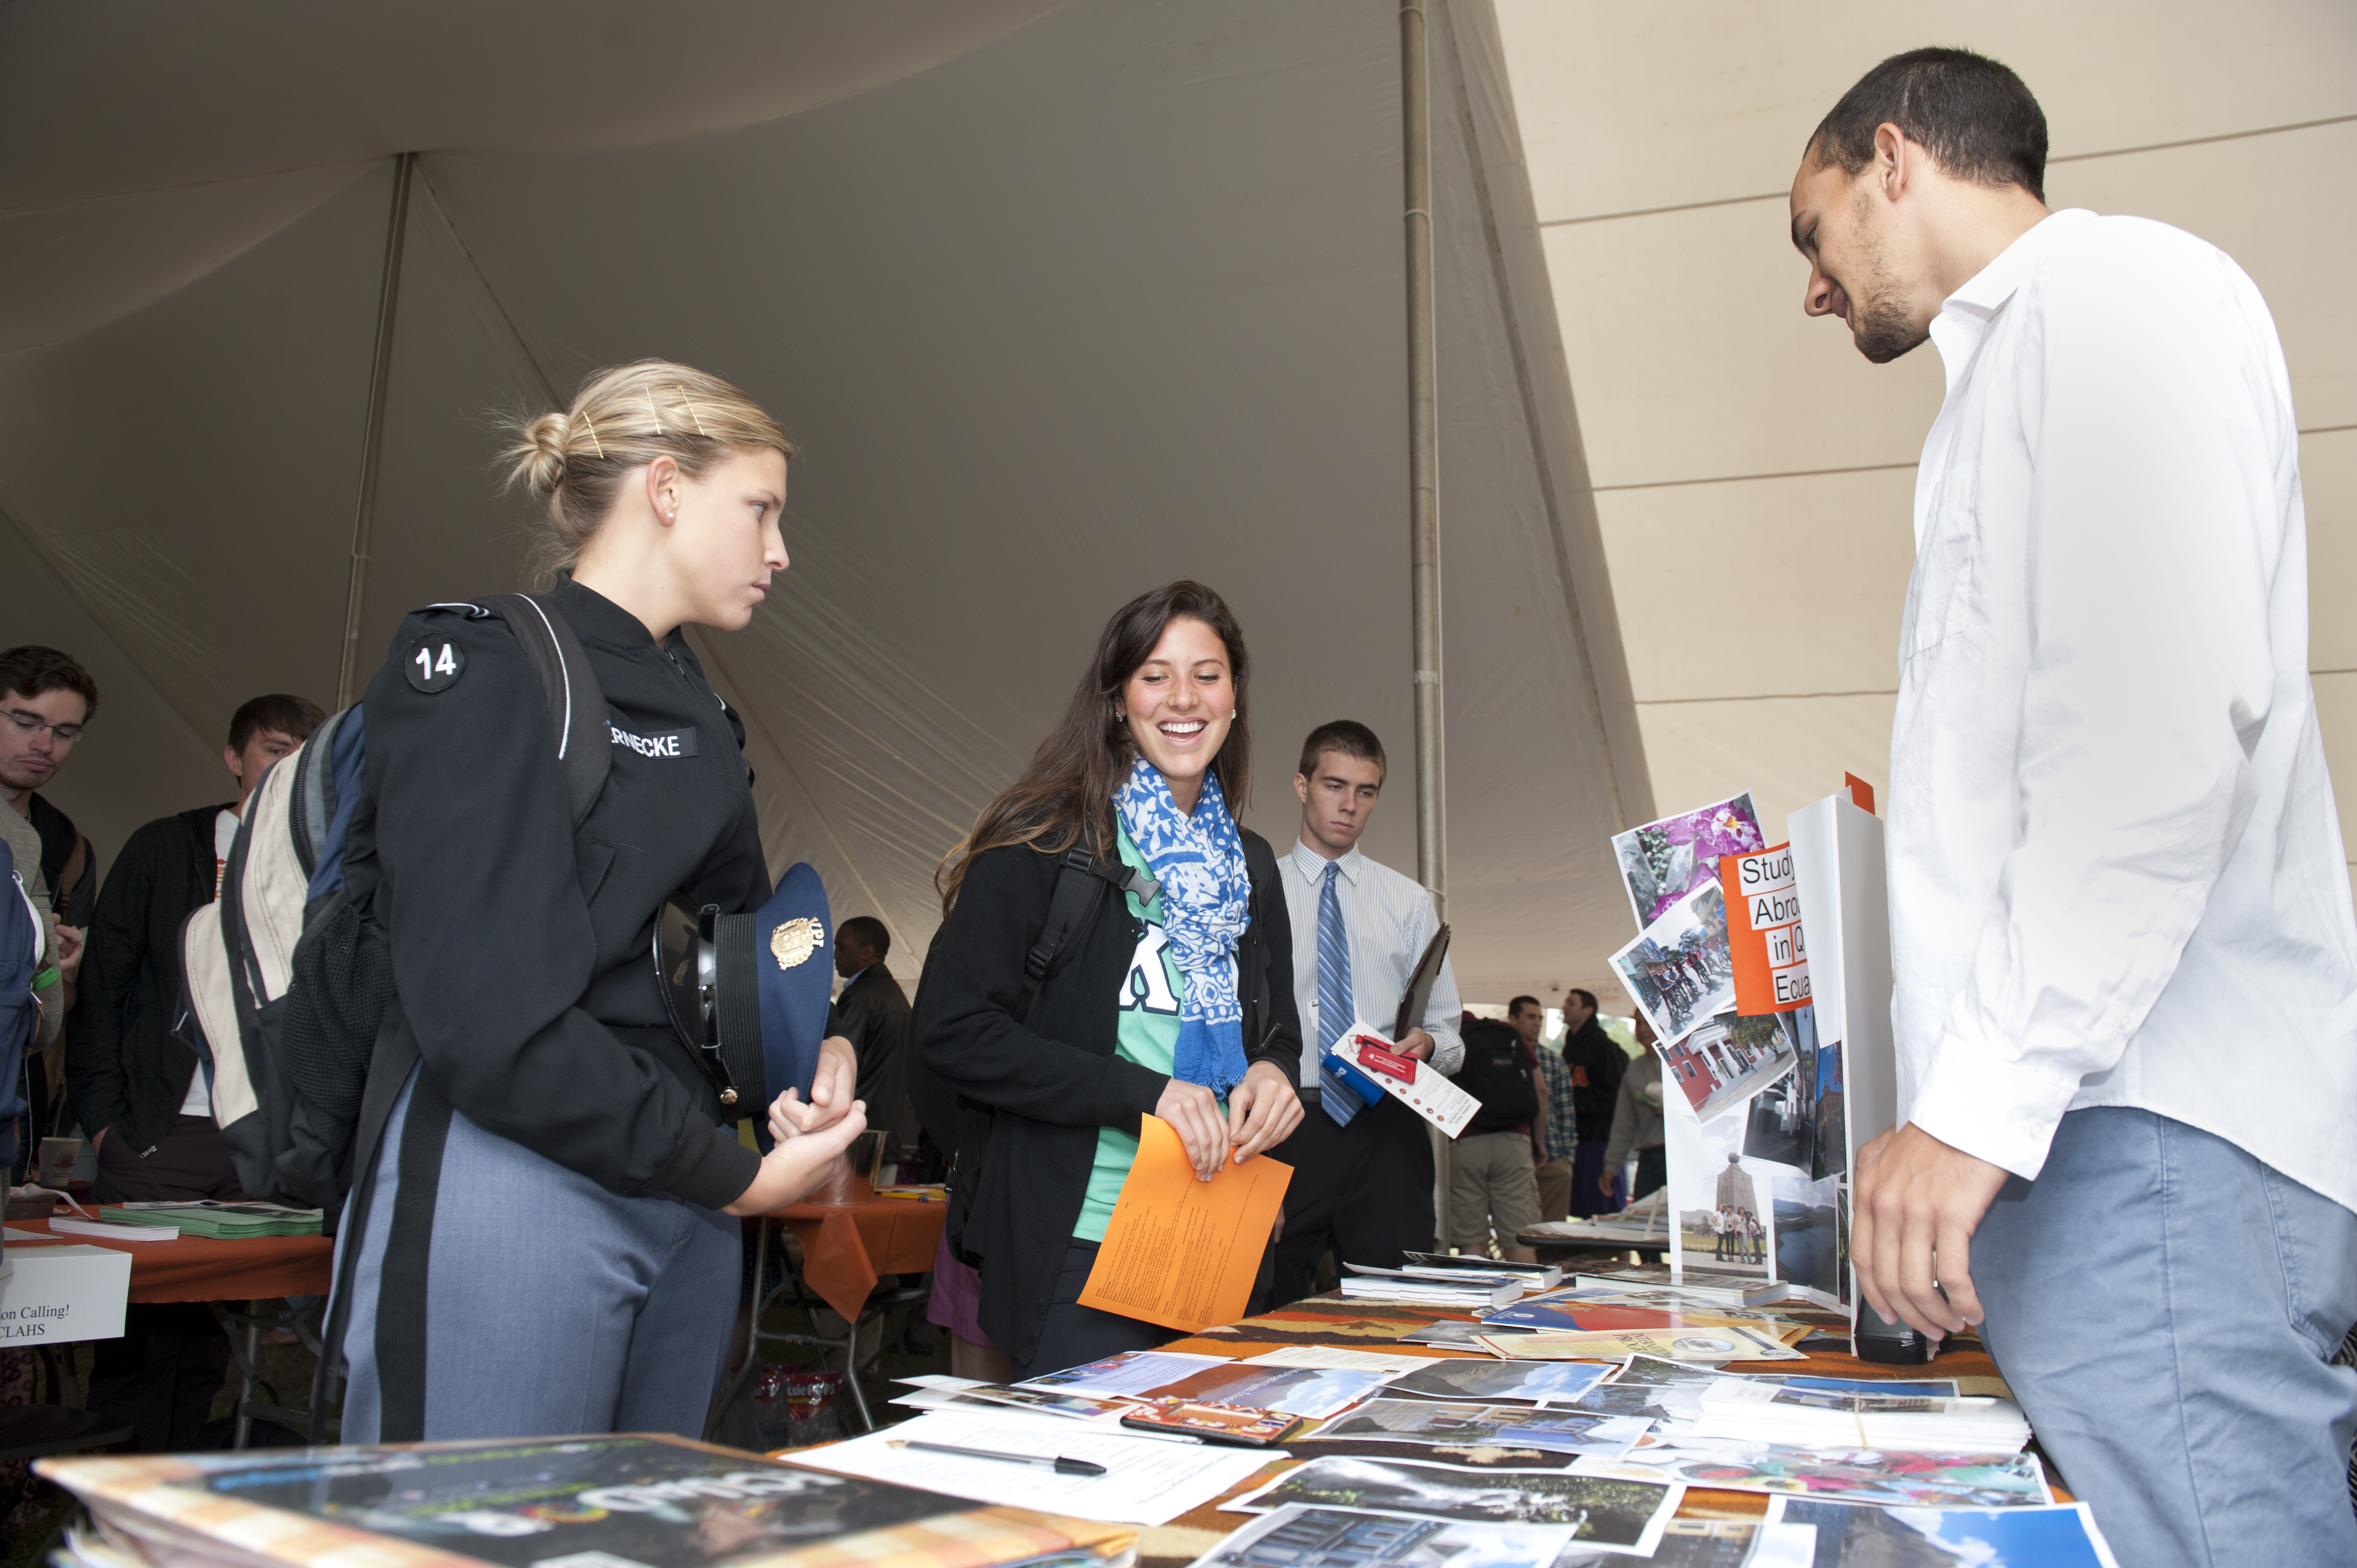 Students gather information at the Global Education Fair.